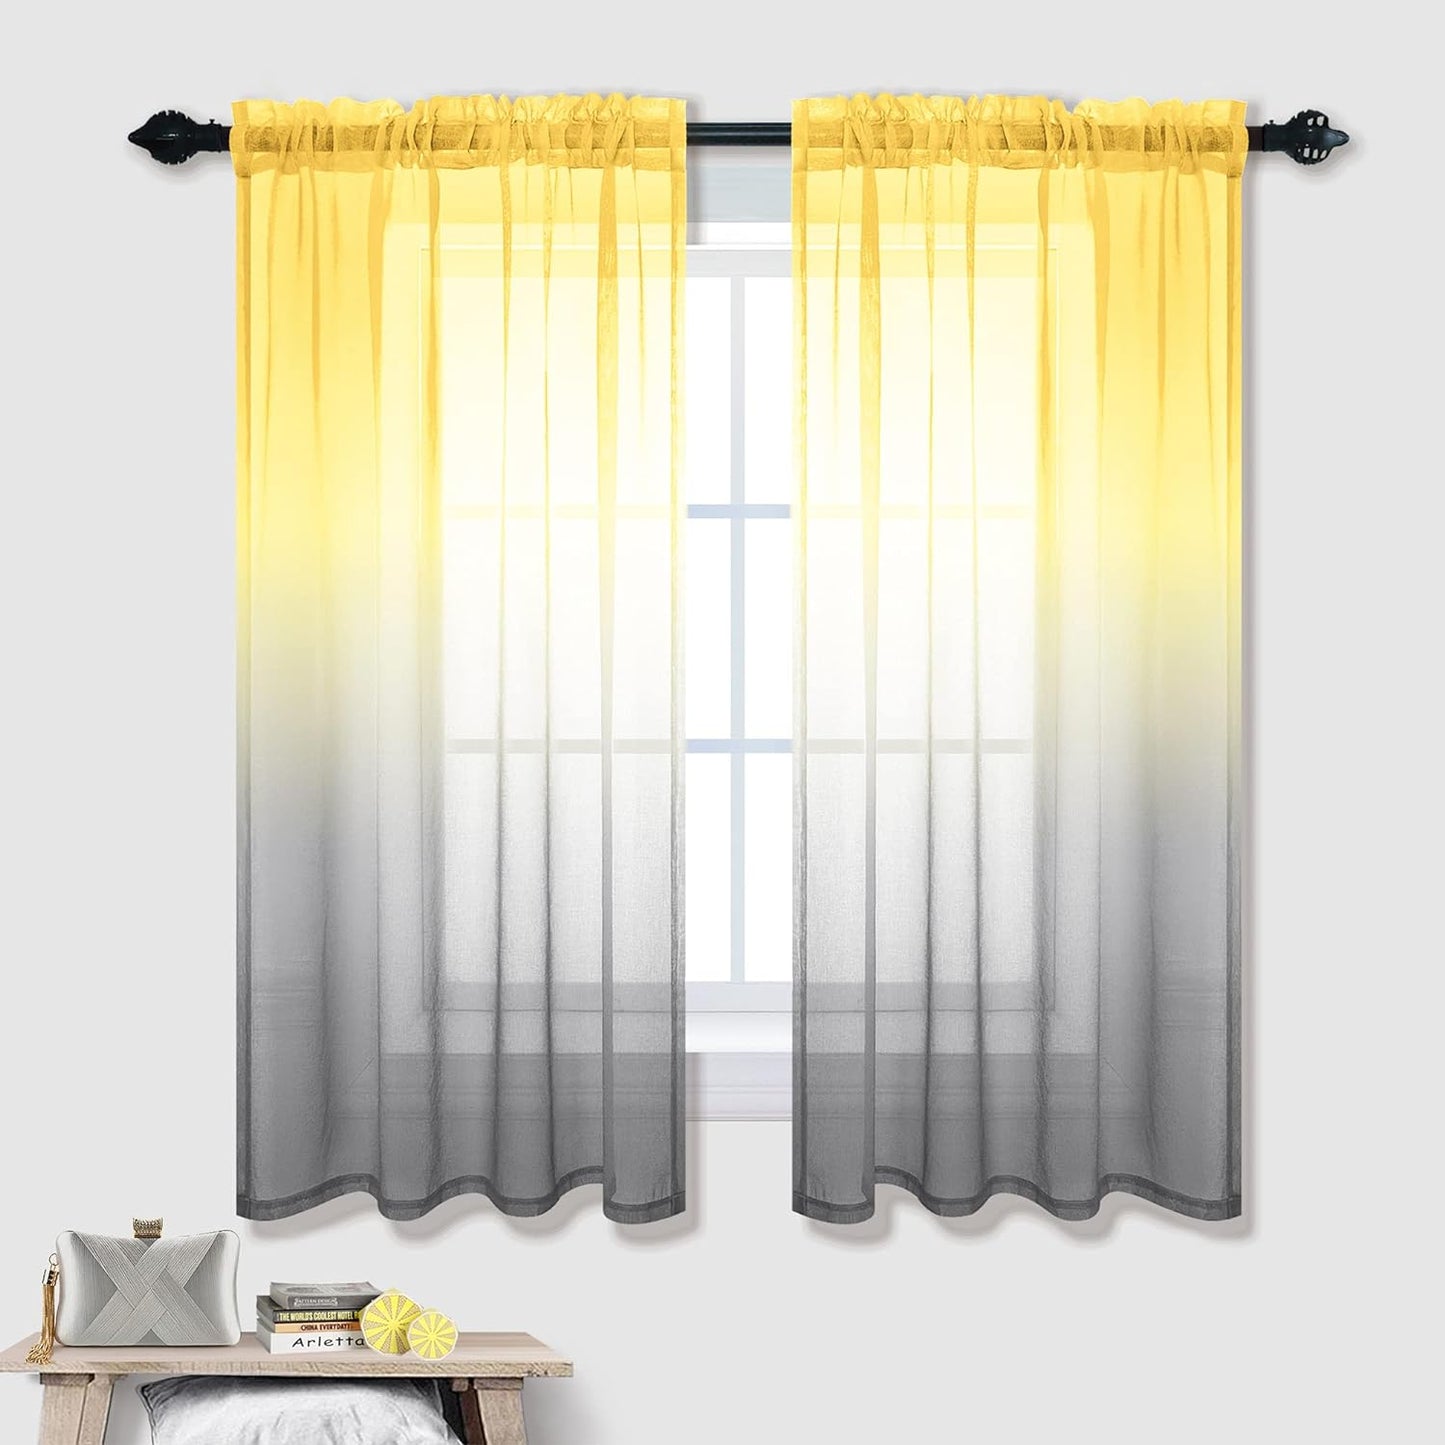 Spring Sheer Curtains for Living Room with Rod Pocket Window Treatments Decor 84 Inch Length Bedroom Curtain Set of 2 Panels Yellow and Grey Gray  PITALK TEXTILE Yellow And Grey 42X45 